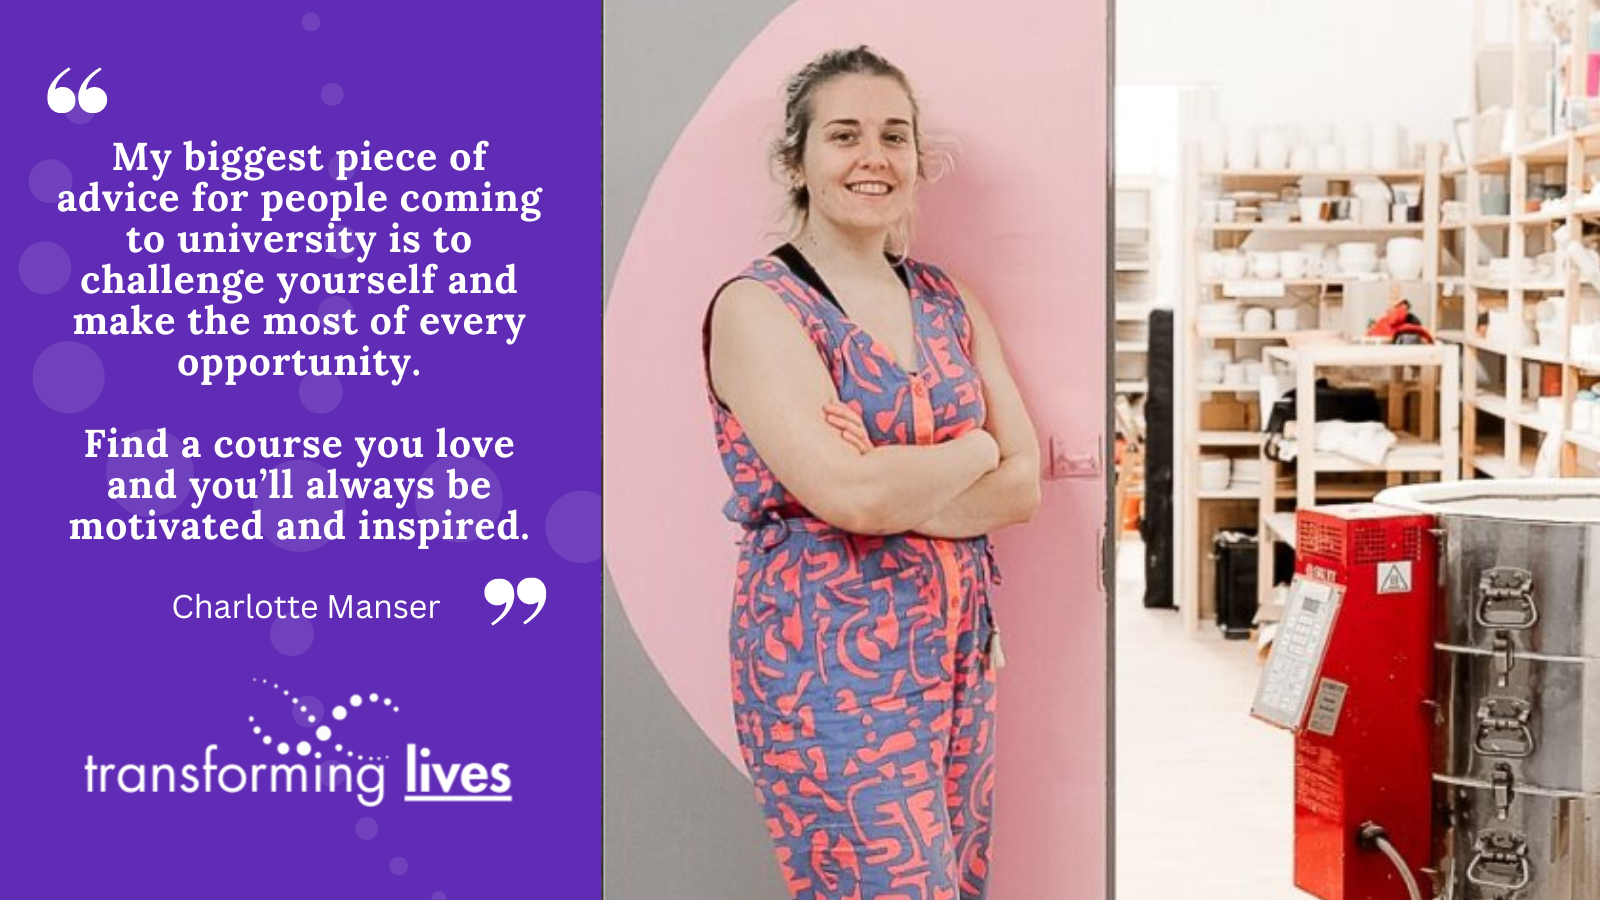 "My biggest piece of advice for people coming to university is to challenge yourself and make the most of every opportunity. Find a course you love and you’ll always be motivated and inspired."